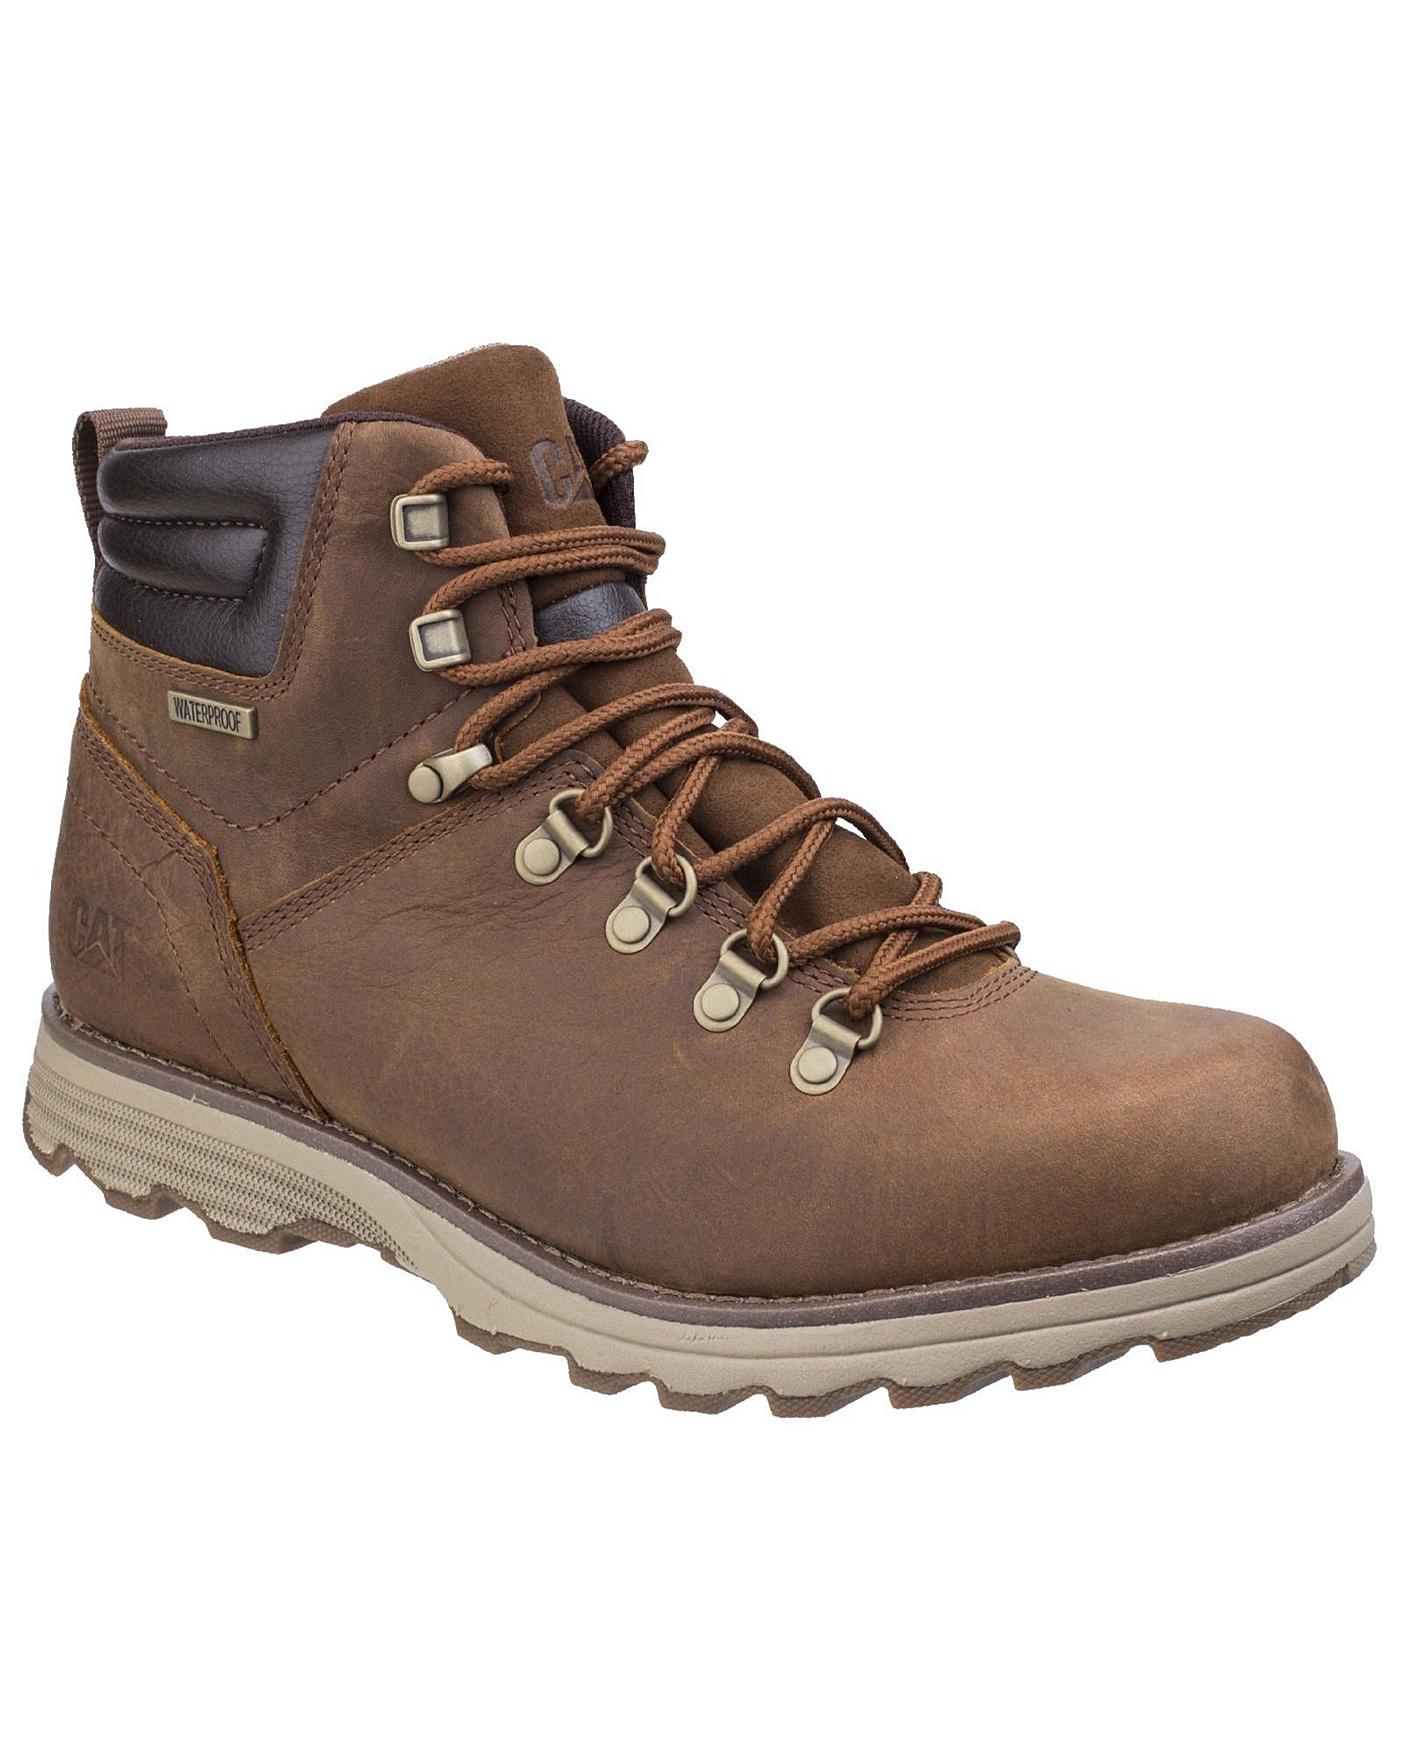 CAT Footwear Sire WP Mens Lace up Boot | J D Williams